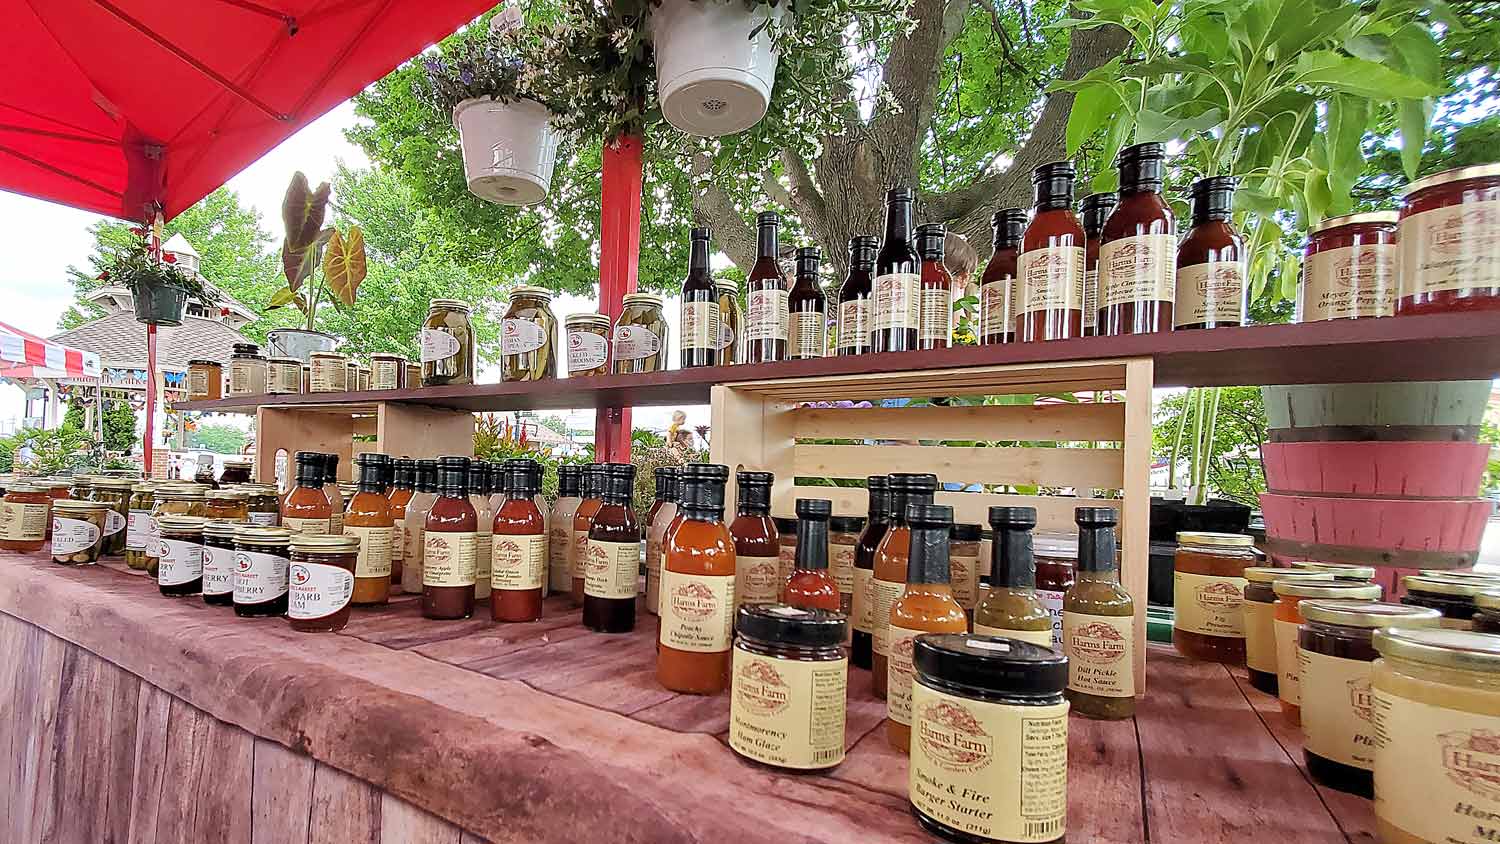 Jams, sauces, and more from Harms Farm at the Downtown Crystal Lake Farmers Market.